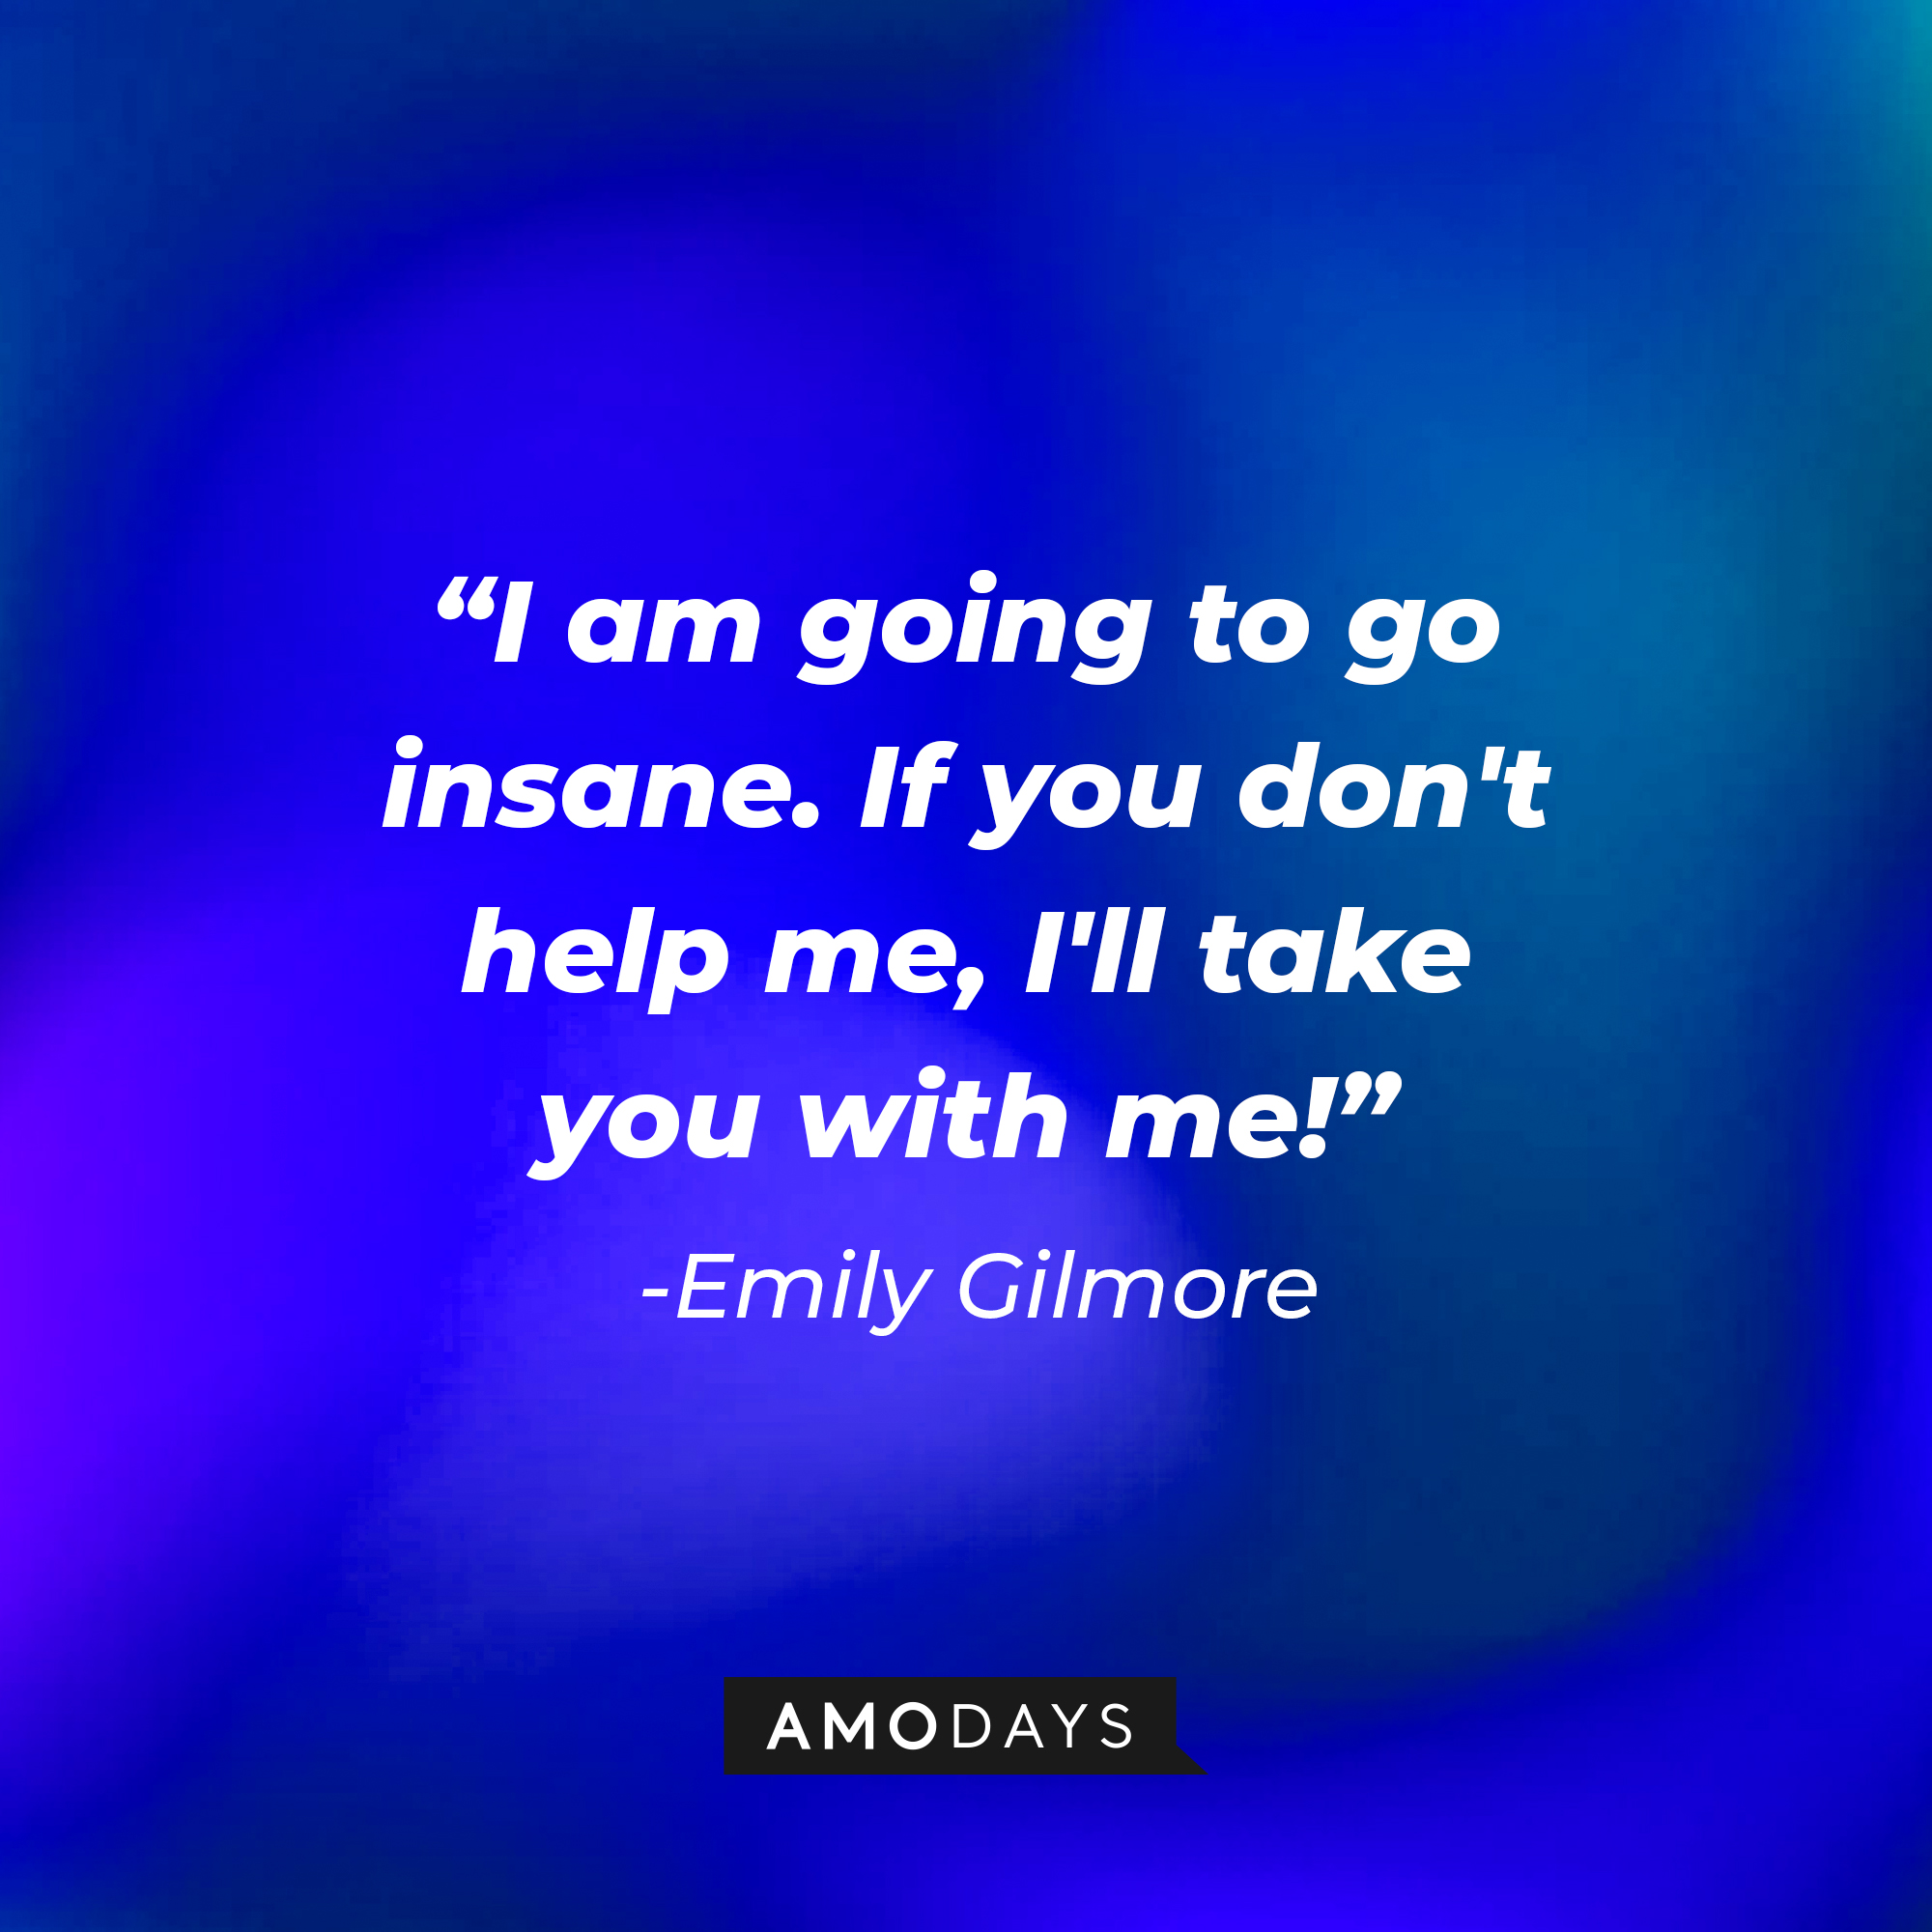 Emily Gilmore's quote: "I am going to go insane. If you don't help me, I'll take you with me!" | Source: Amodays